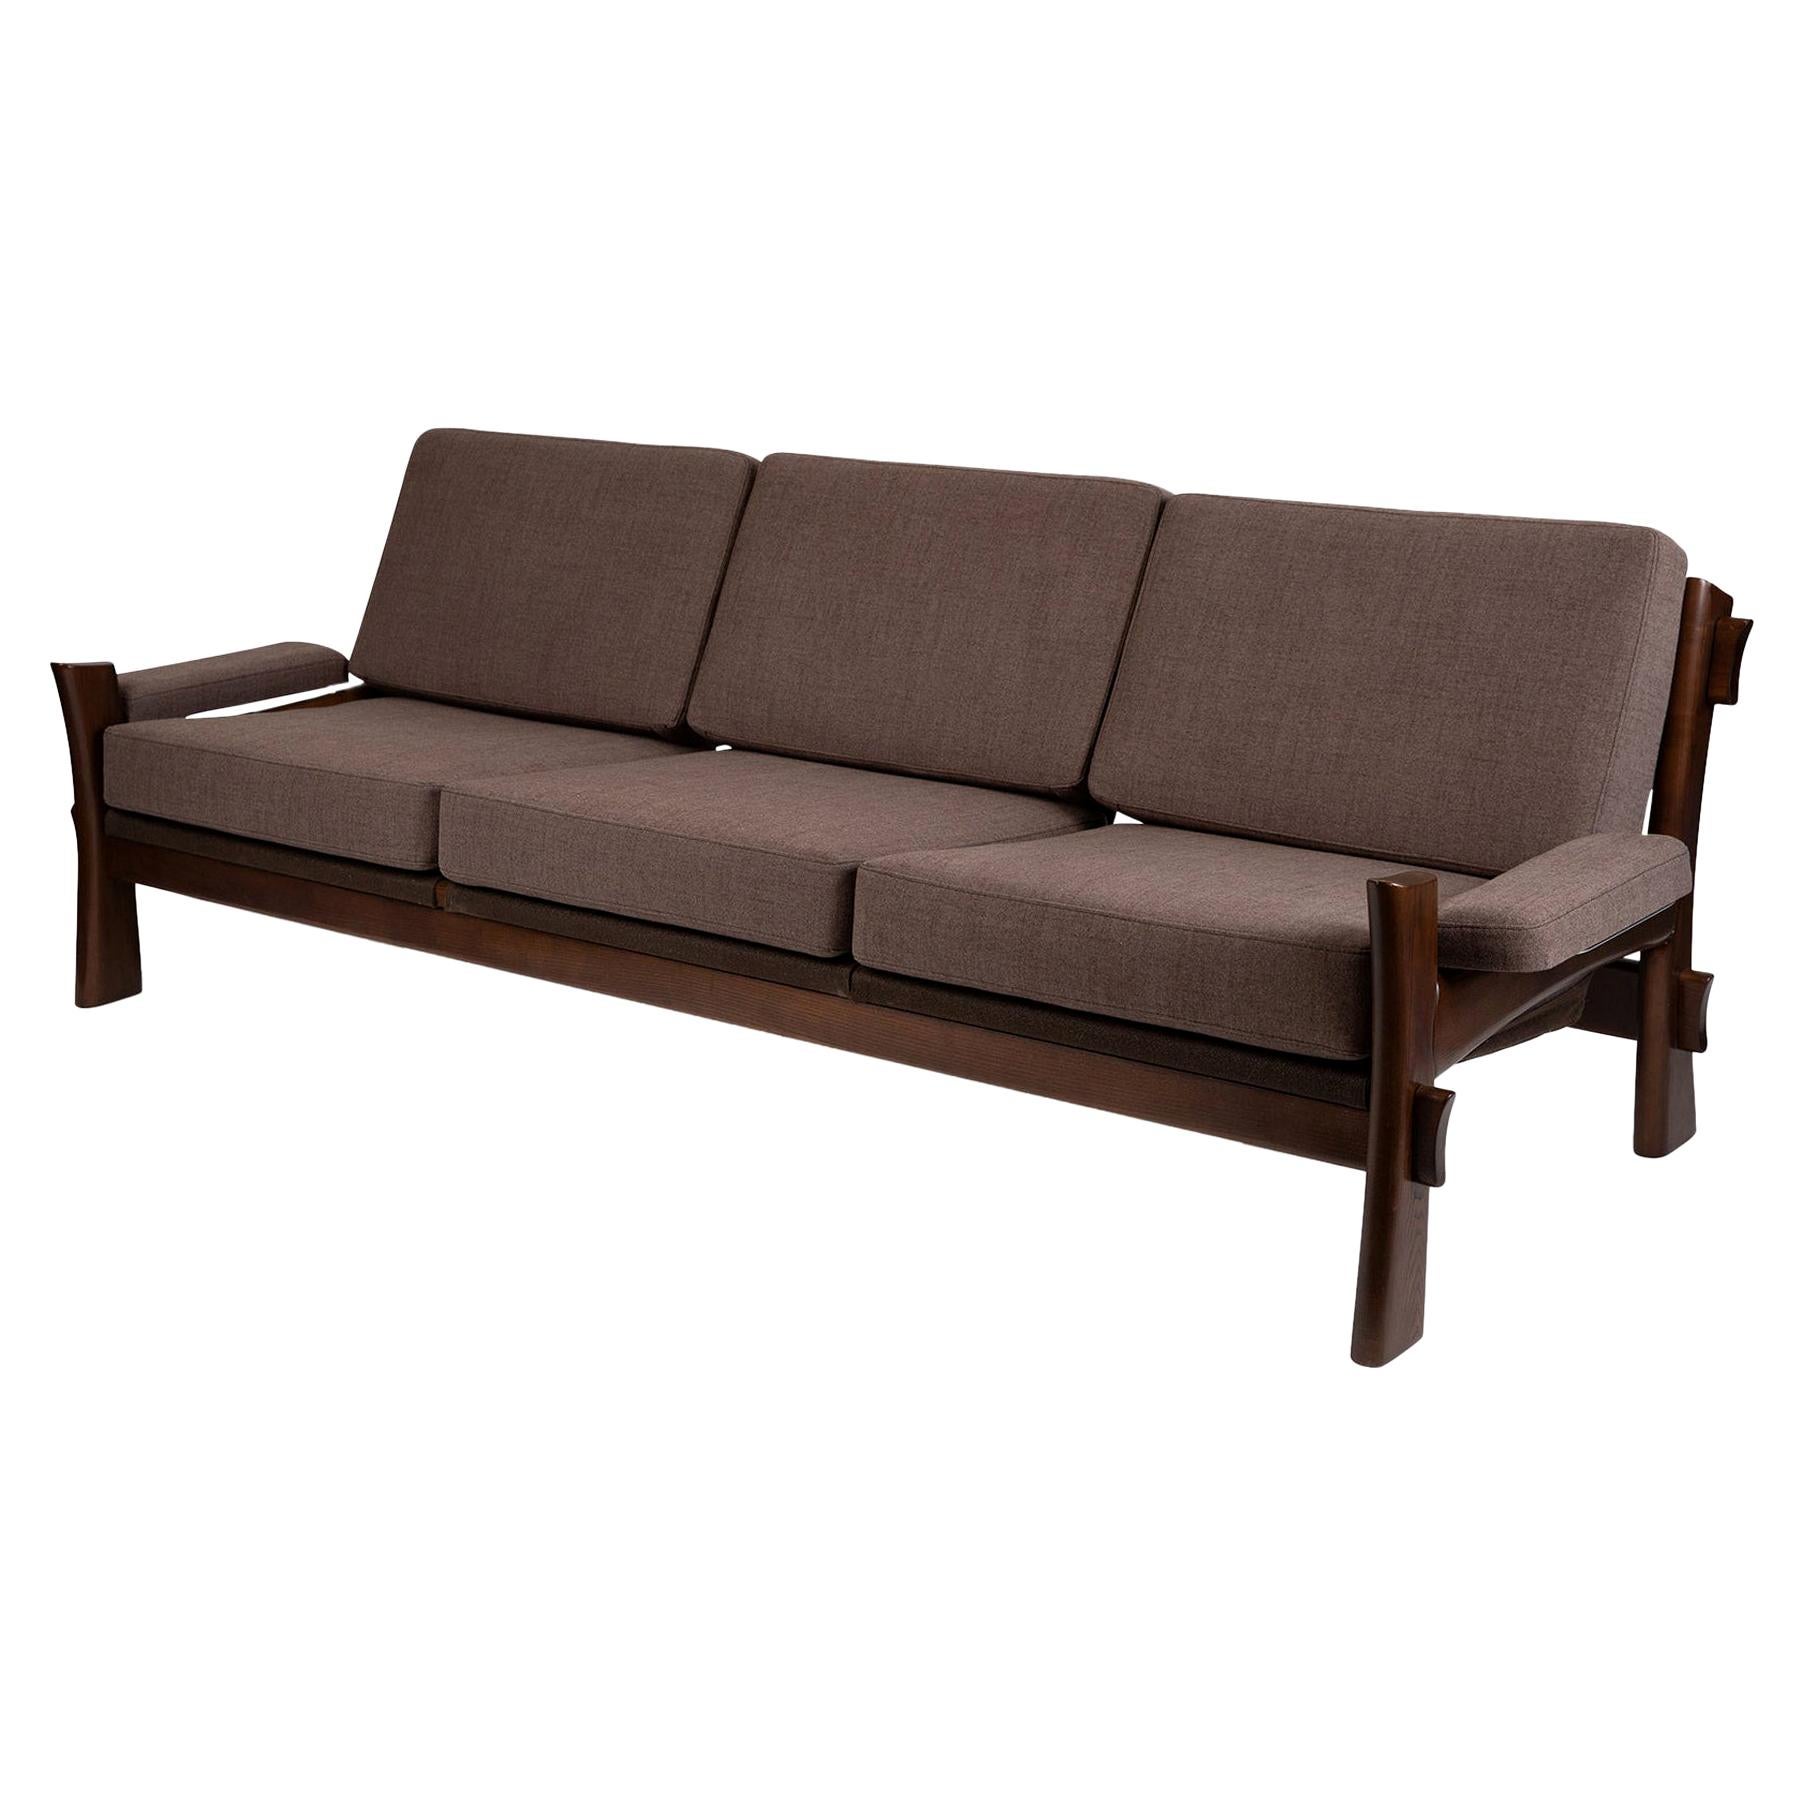 Lacquered Solid Oak & Grey Upholstered Danish Sofa